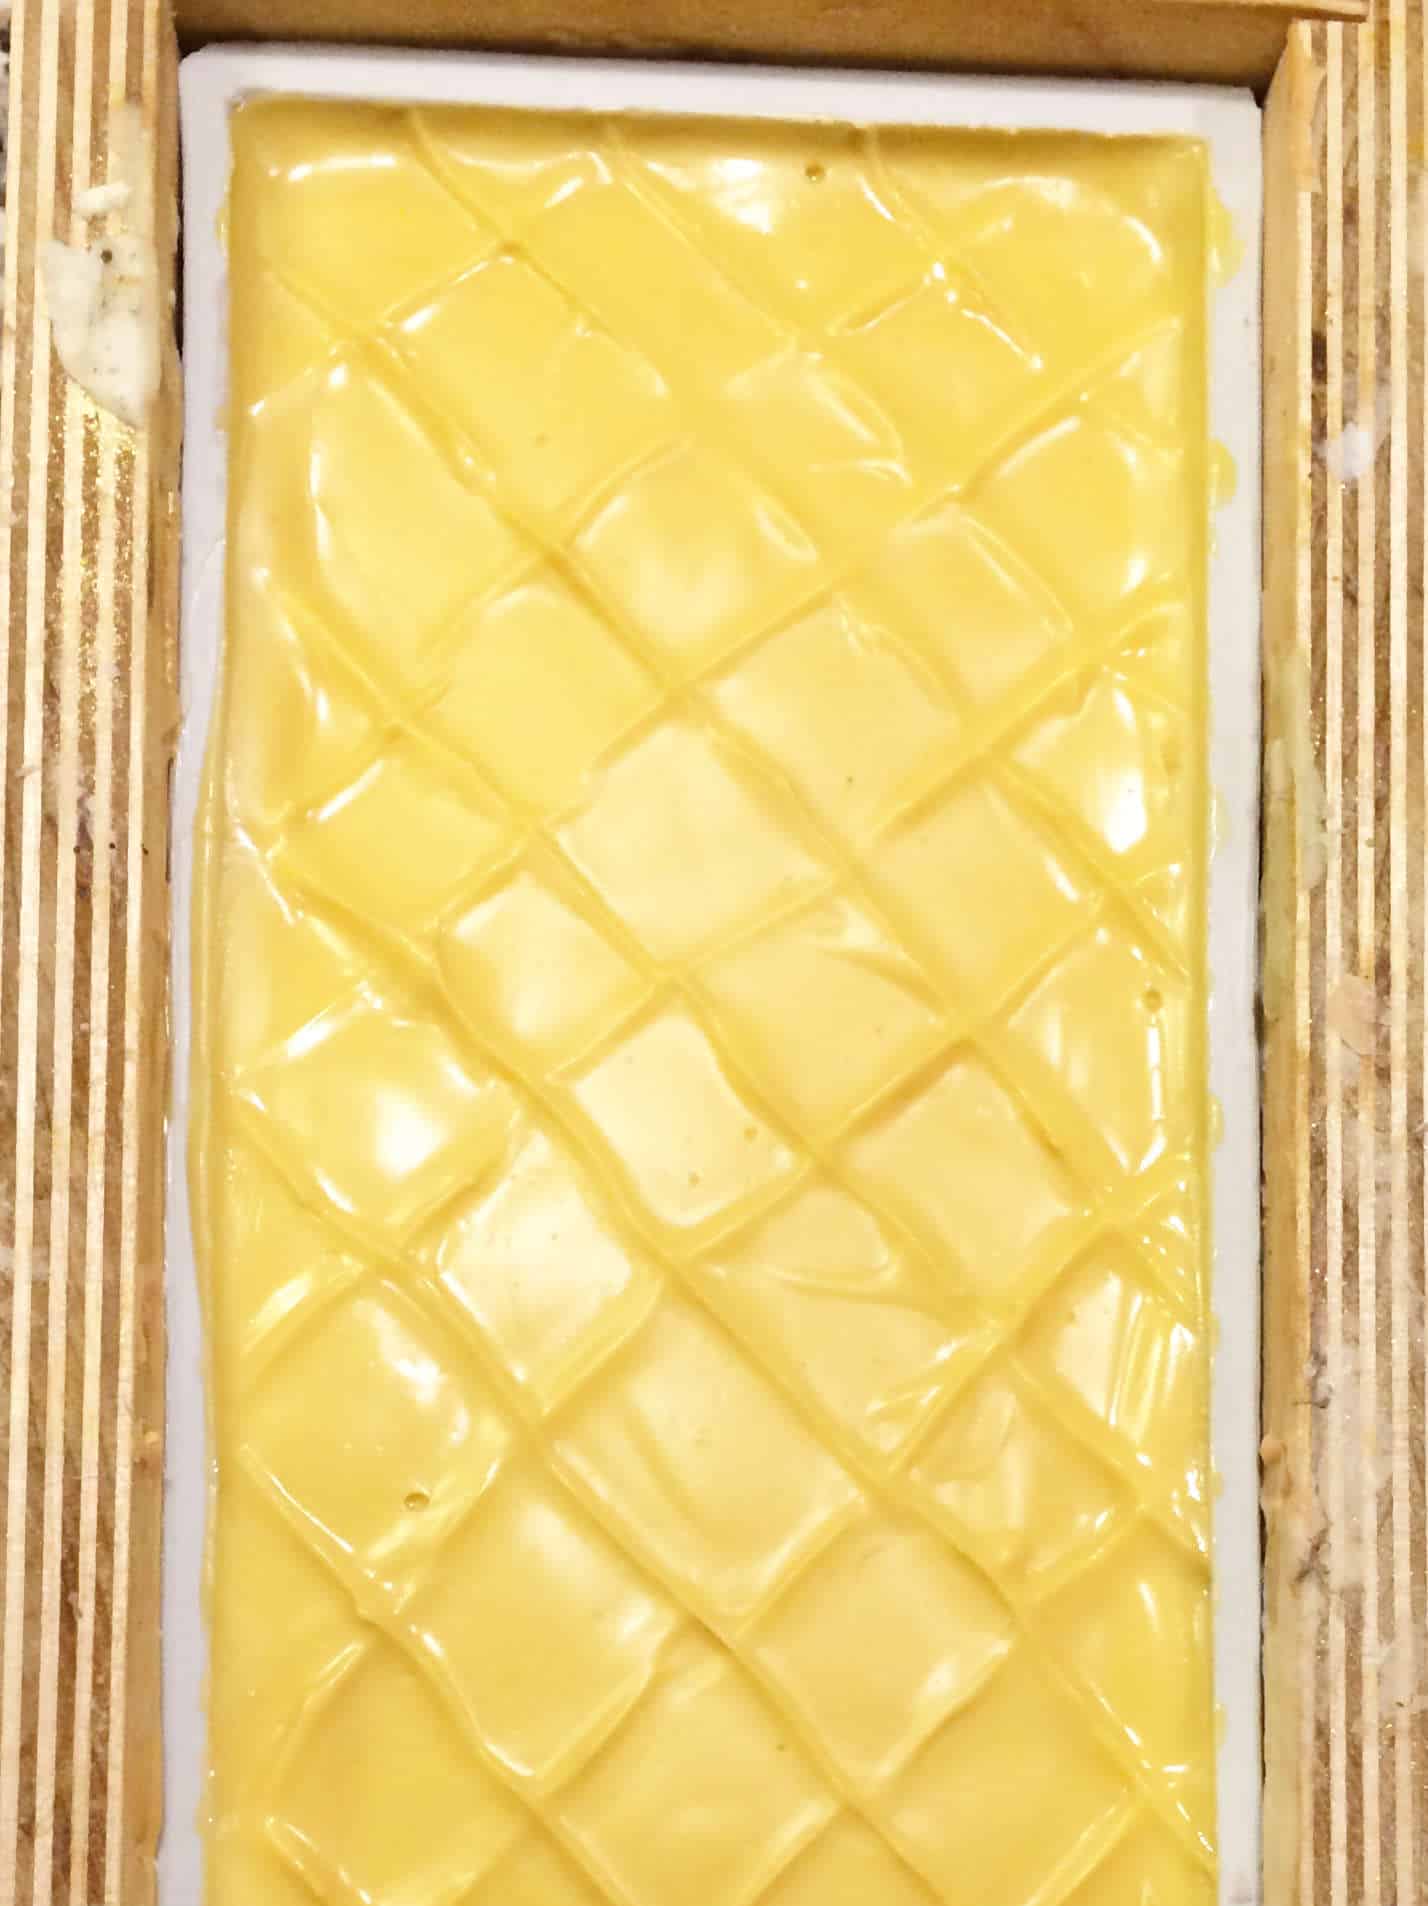 decorated cross hatch top of wet yellow clay soap in a log soap mold.